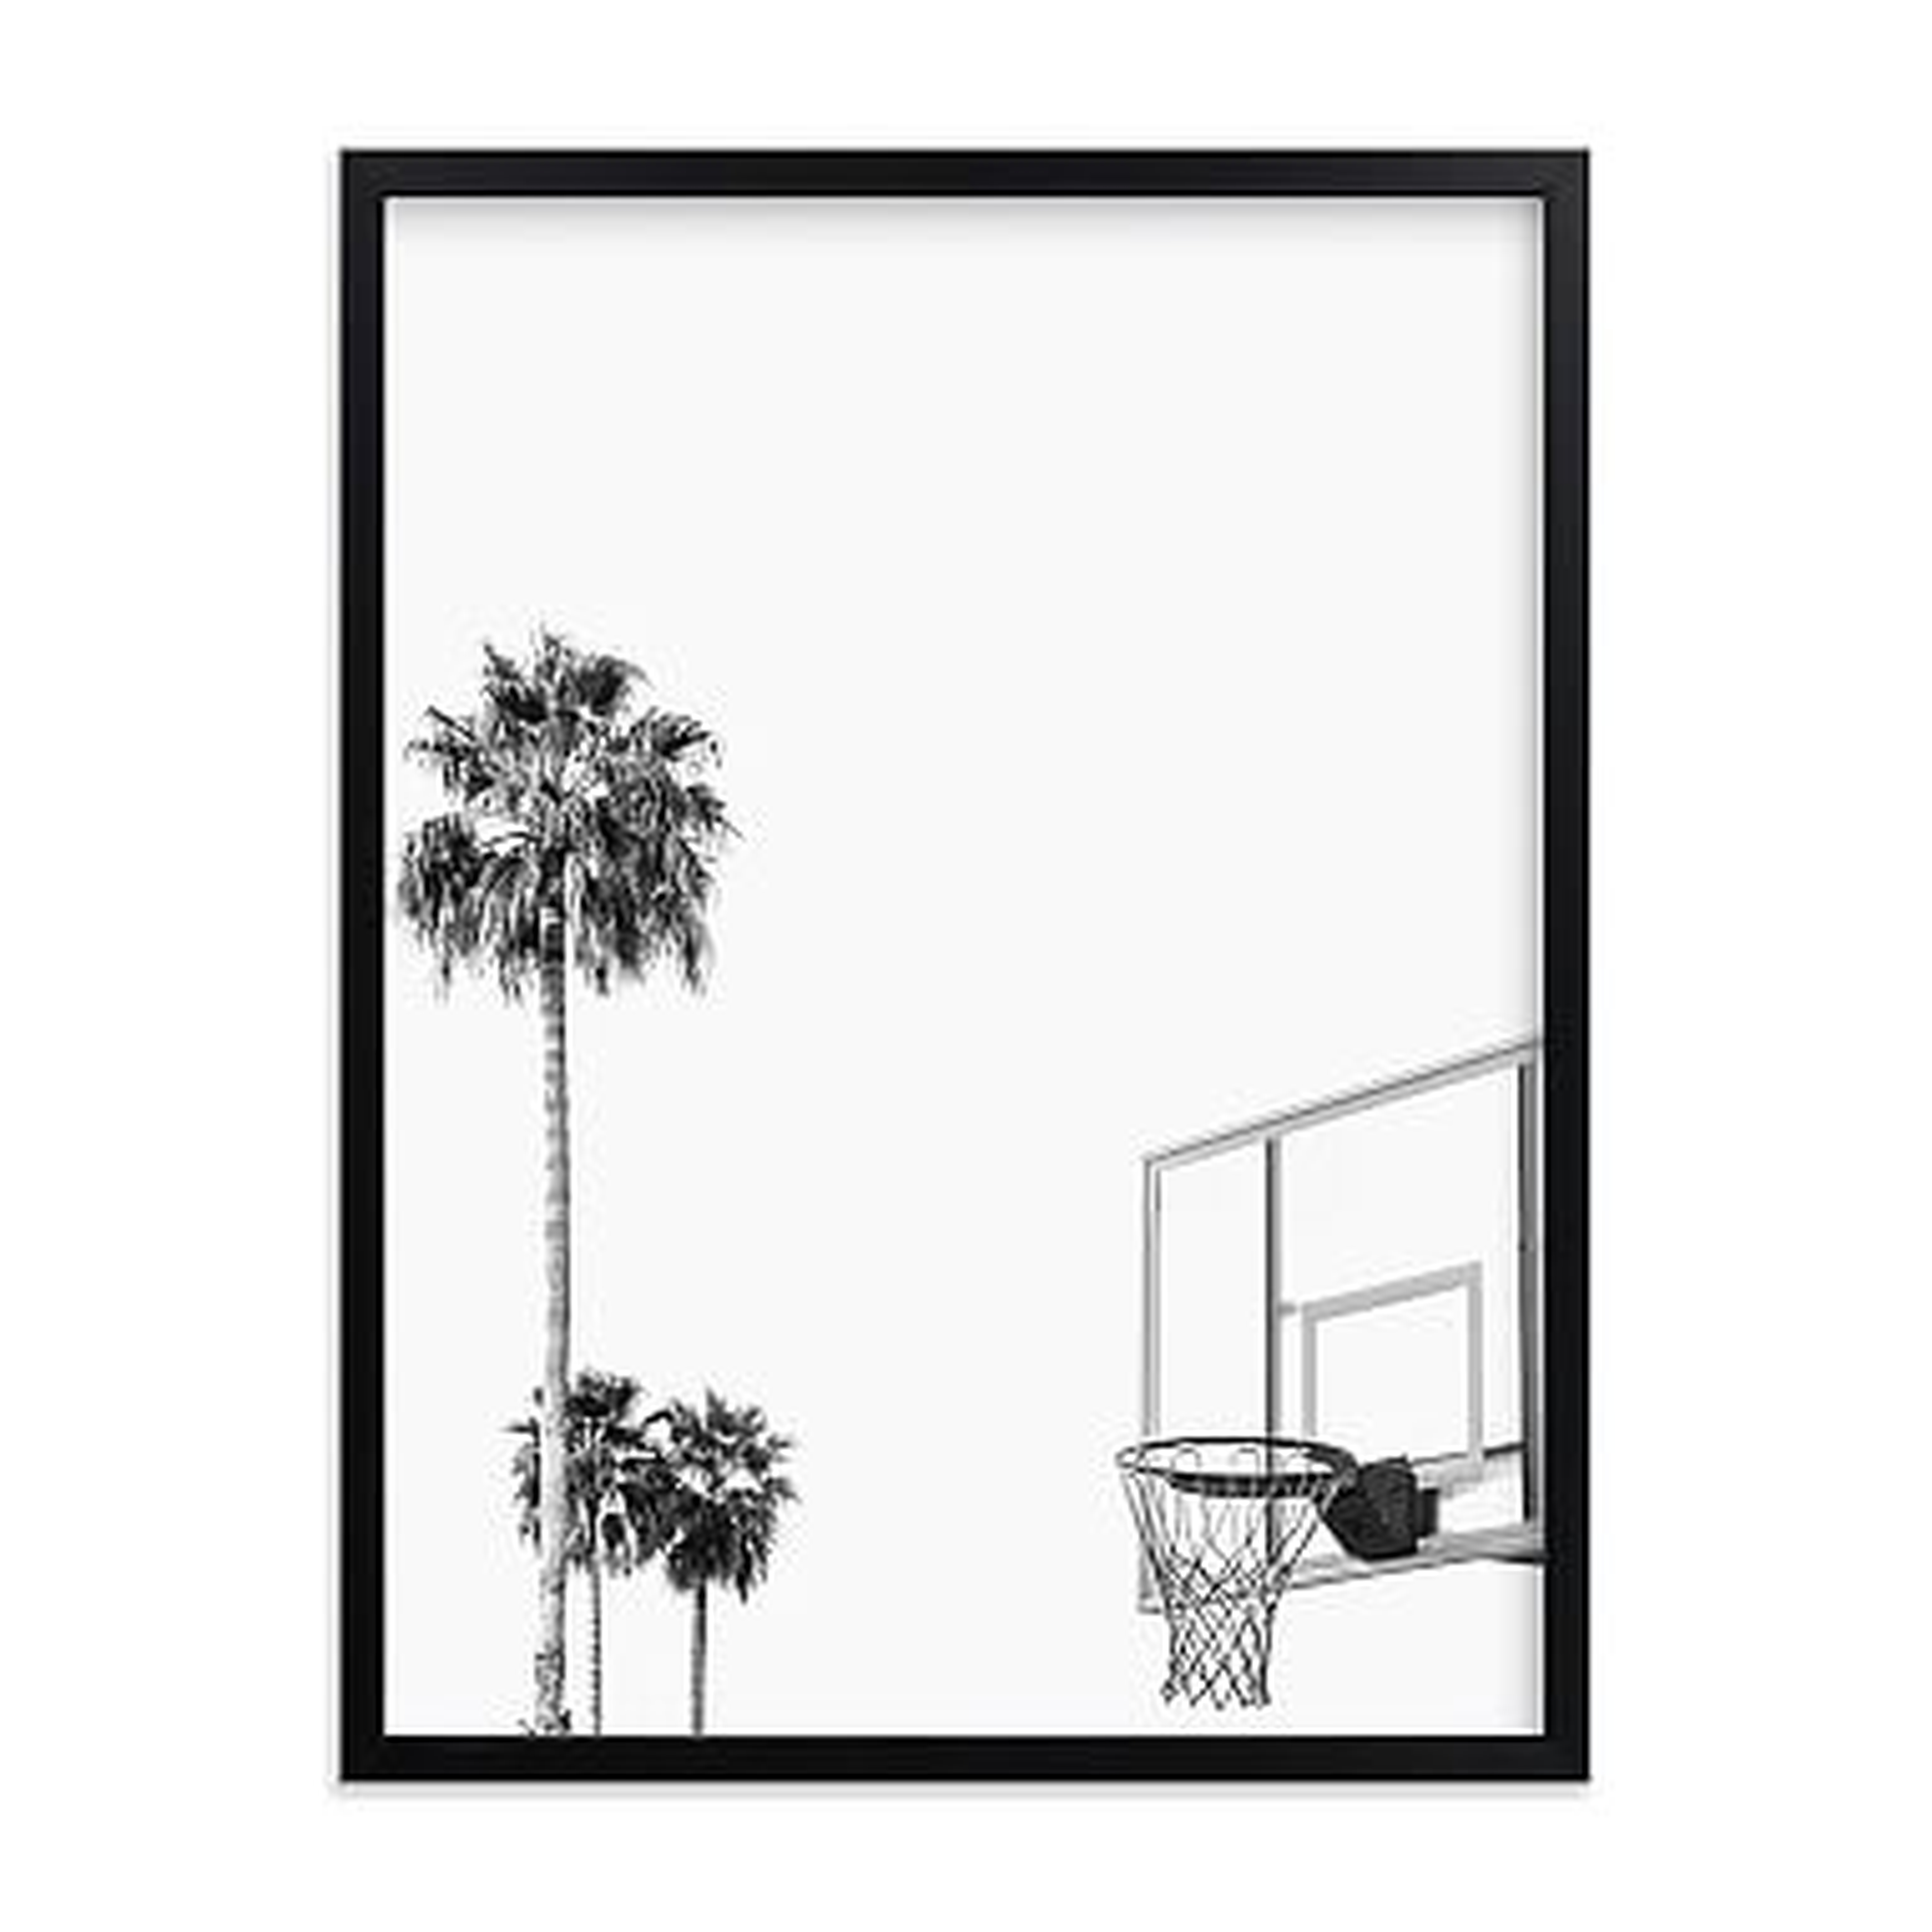 Hoops and Palms Framed Art by Minted(R), Black, 18x24 - Pottery Barn Teen